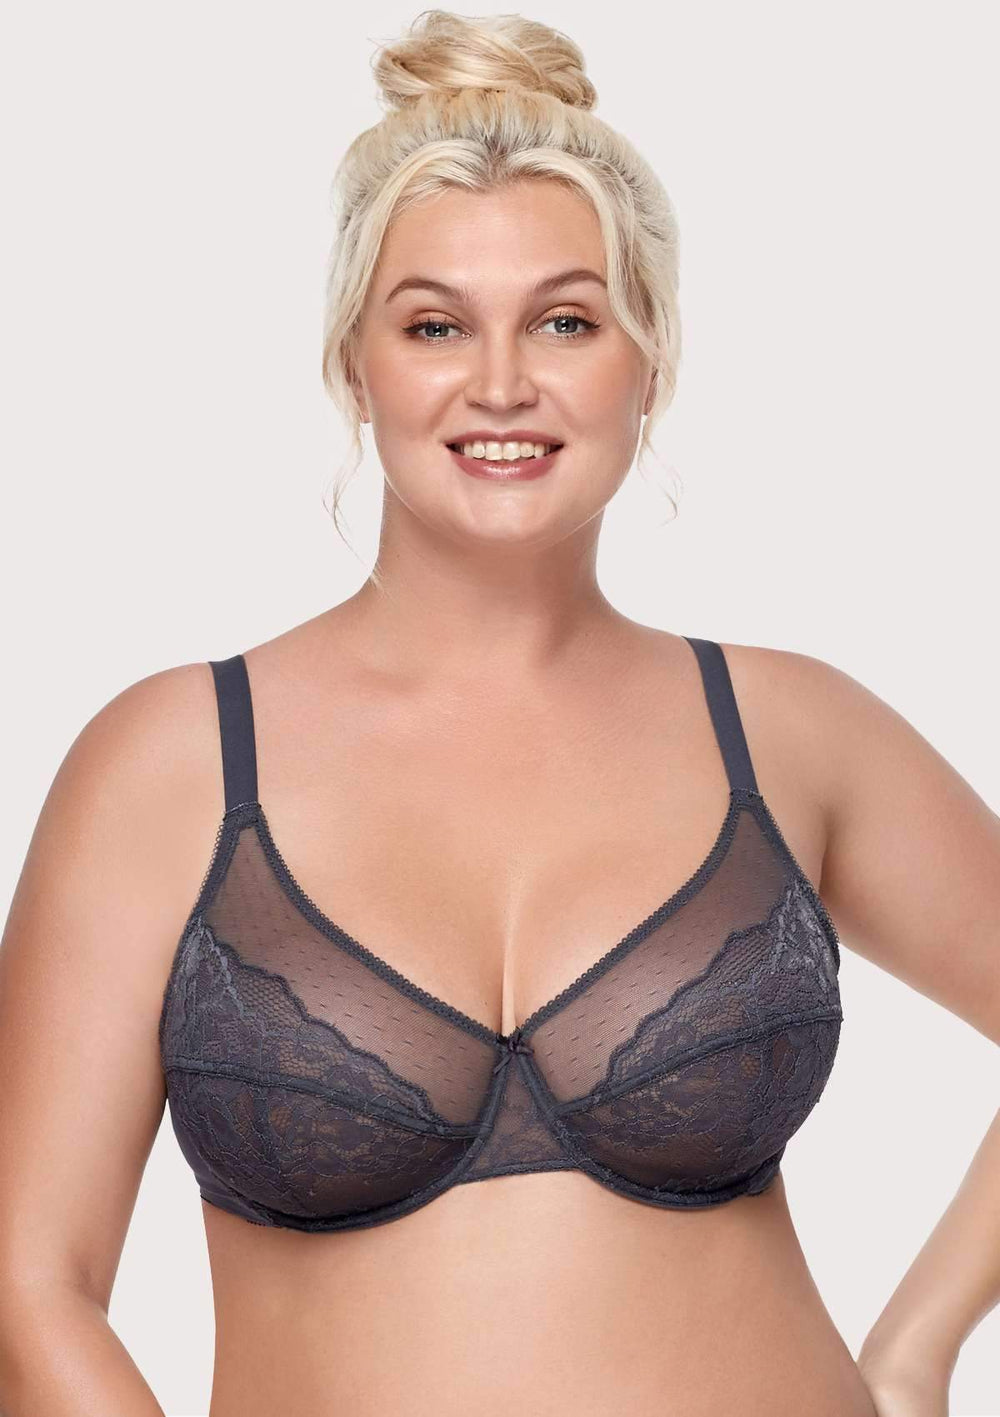 HSIA Bra Try On Haul, Up To Size DDD! Bra That Looks Good And Fits!!!